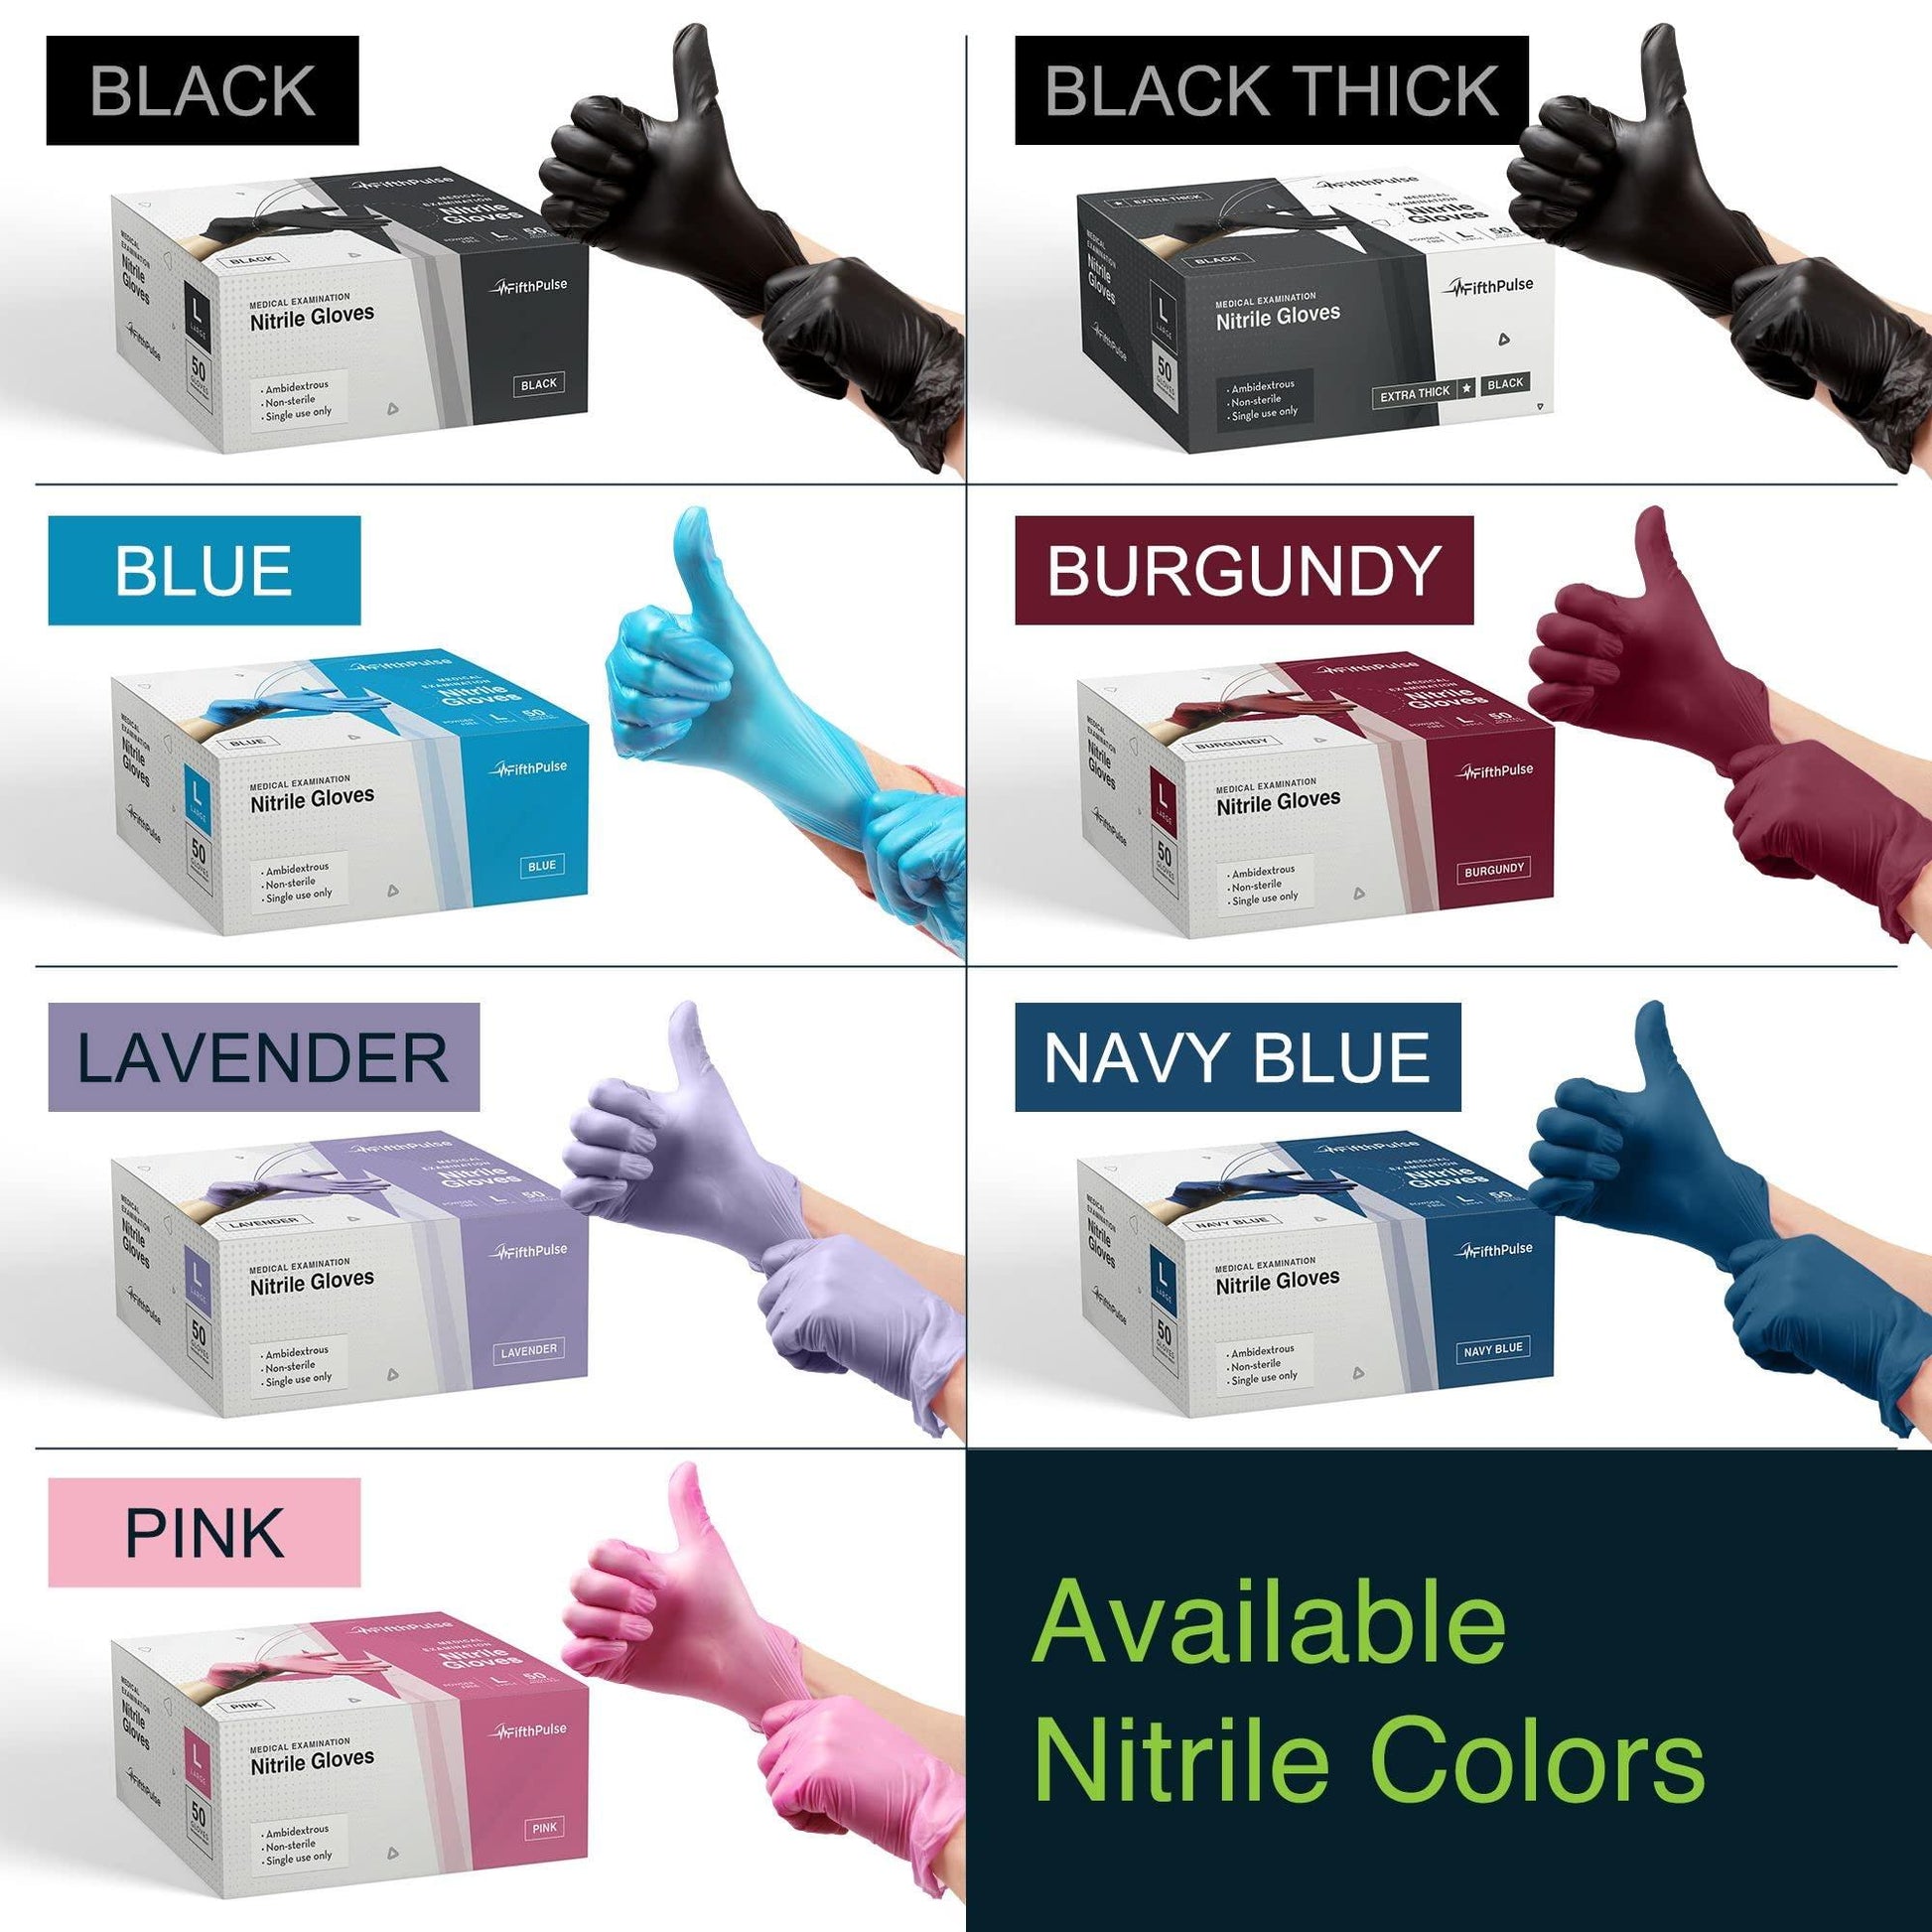 Disposable Black Nitrile Gloves Medium 50 Count - Extra Thick 4.5 Mil - Powder and Latex Free Rubber Gloves - Surgical Medical Exam Gloves - Food Safe Cooking Gloves - CookCave